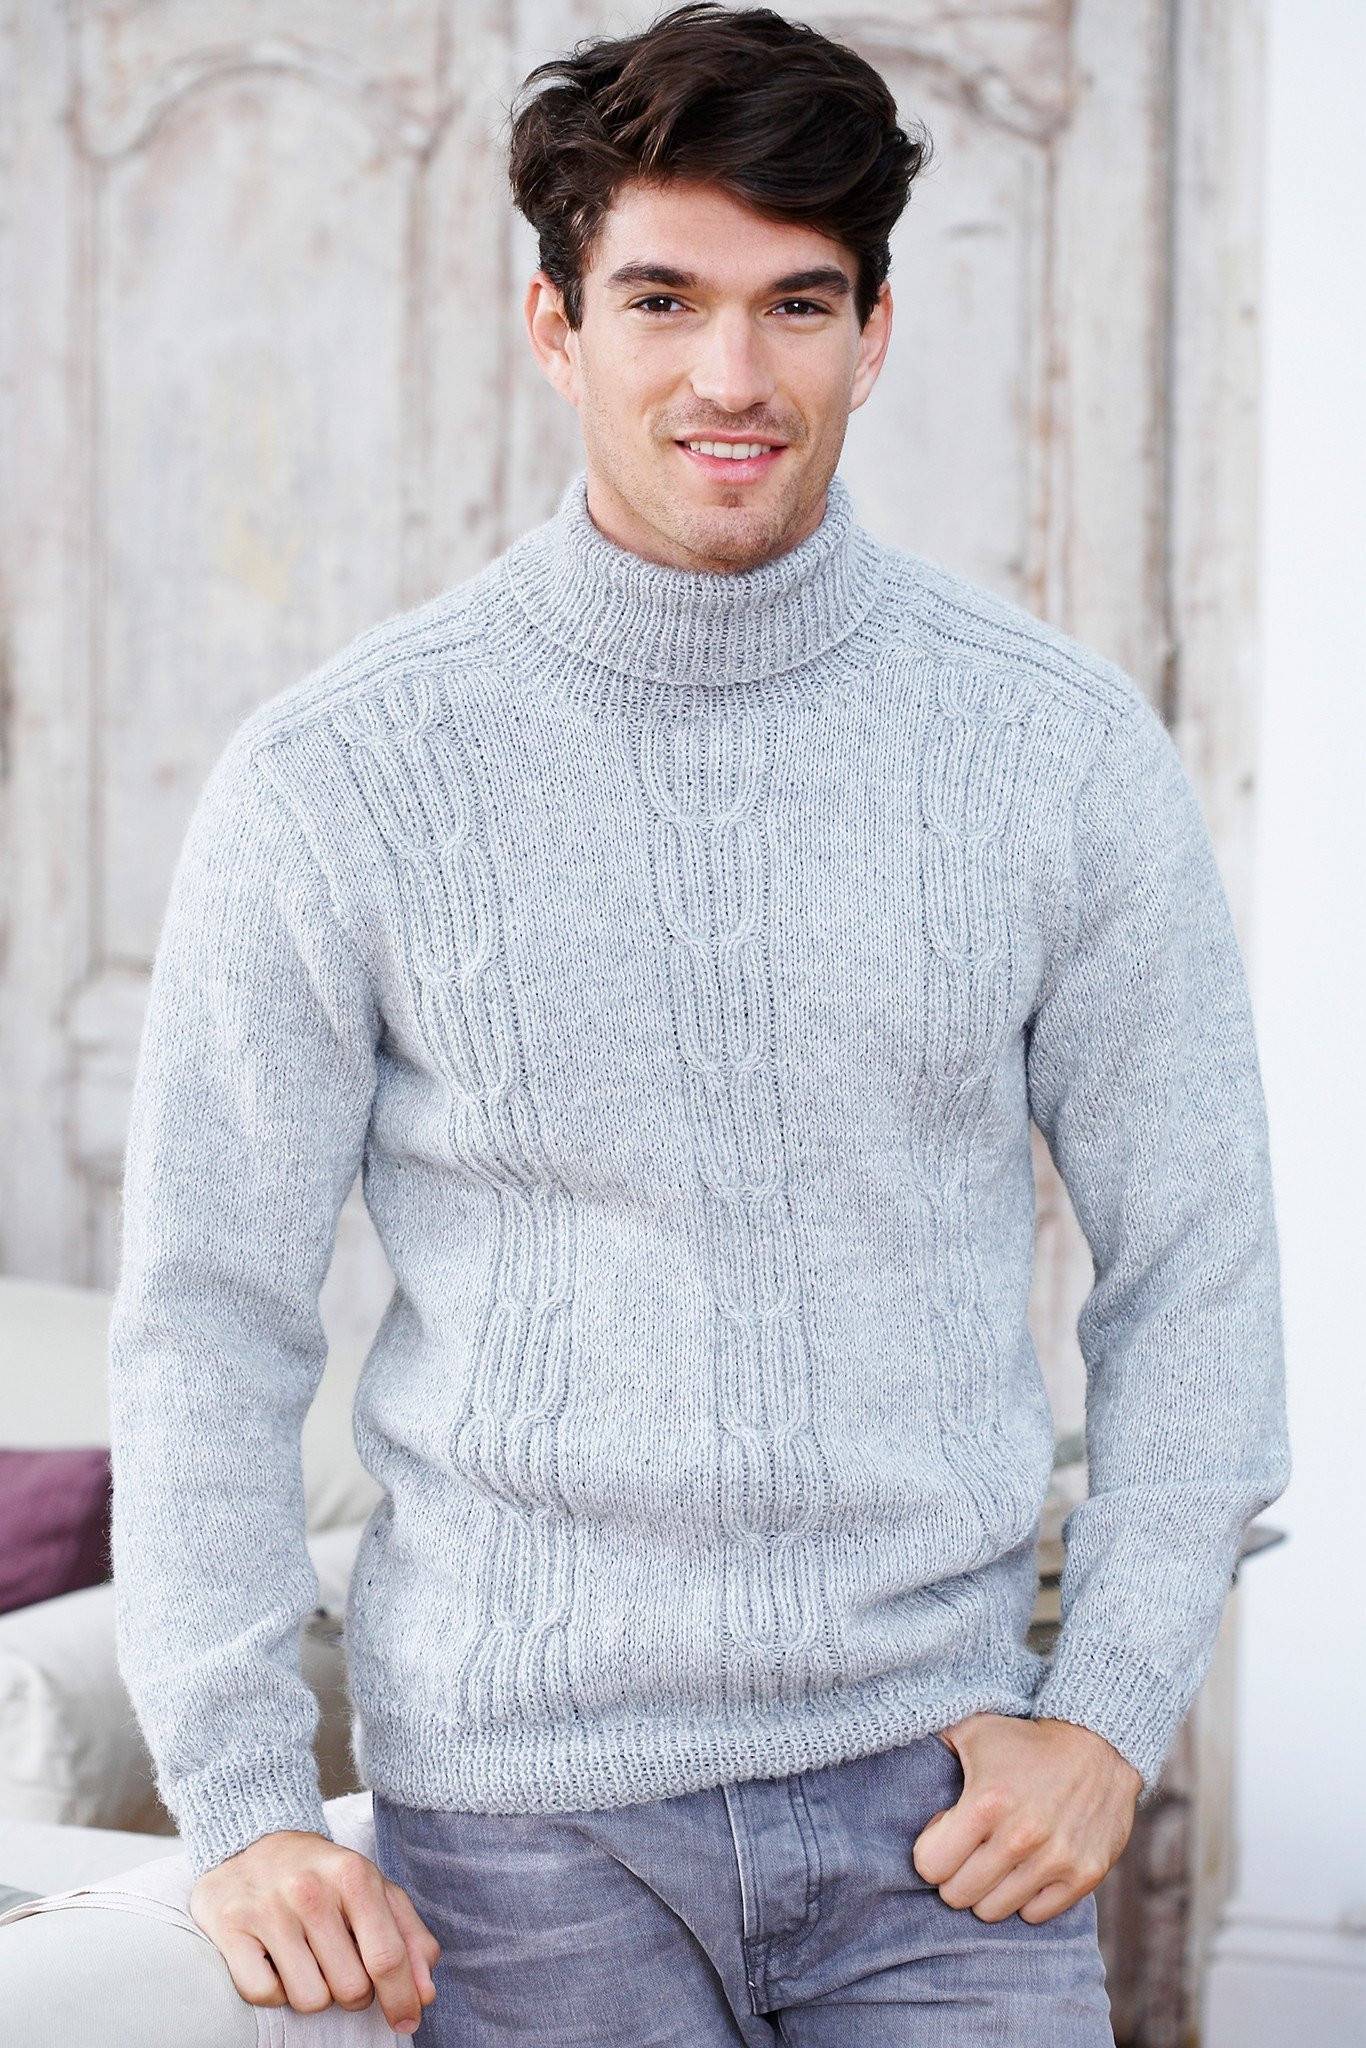 Mens Sweater Vintage Knitting Pattern  The Knitting Network